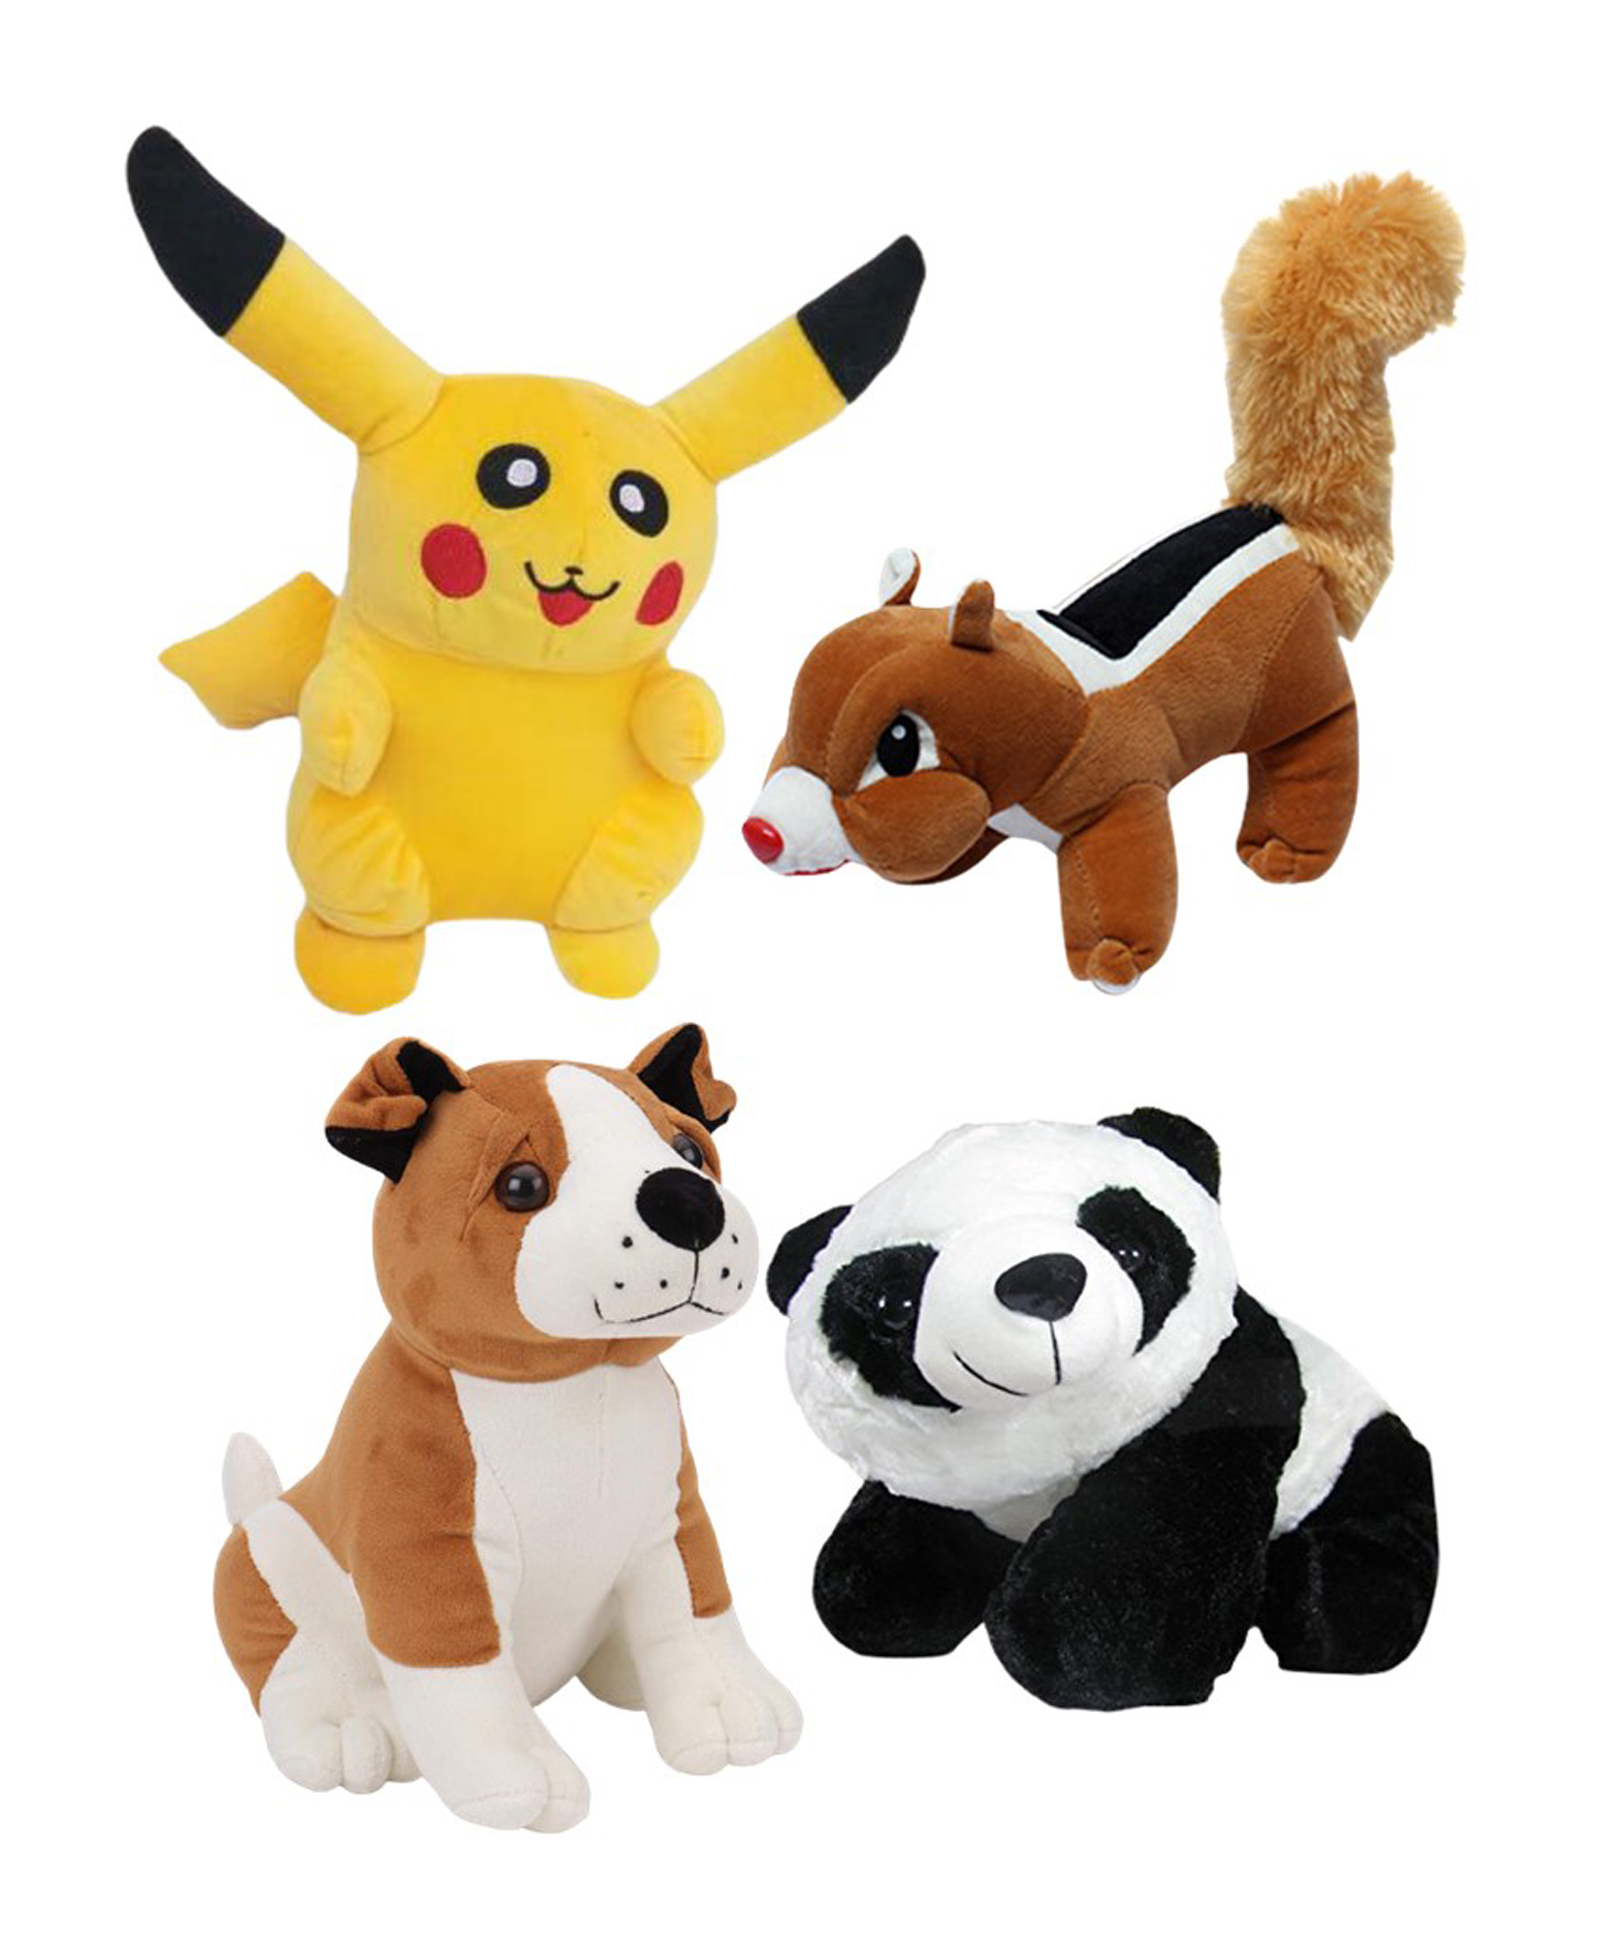 Deals India Combo of 4 Super Soft Plush Toys Multicolor - Height 25 cm Online  India, Buy Soft Toys for (3-8 Years) at  - 9629678